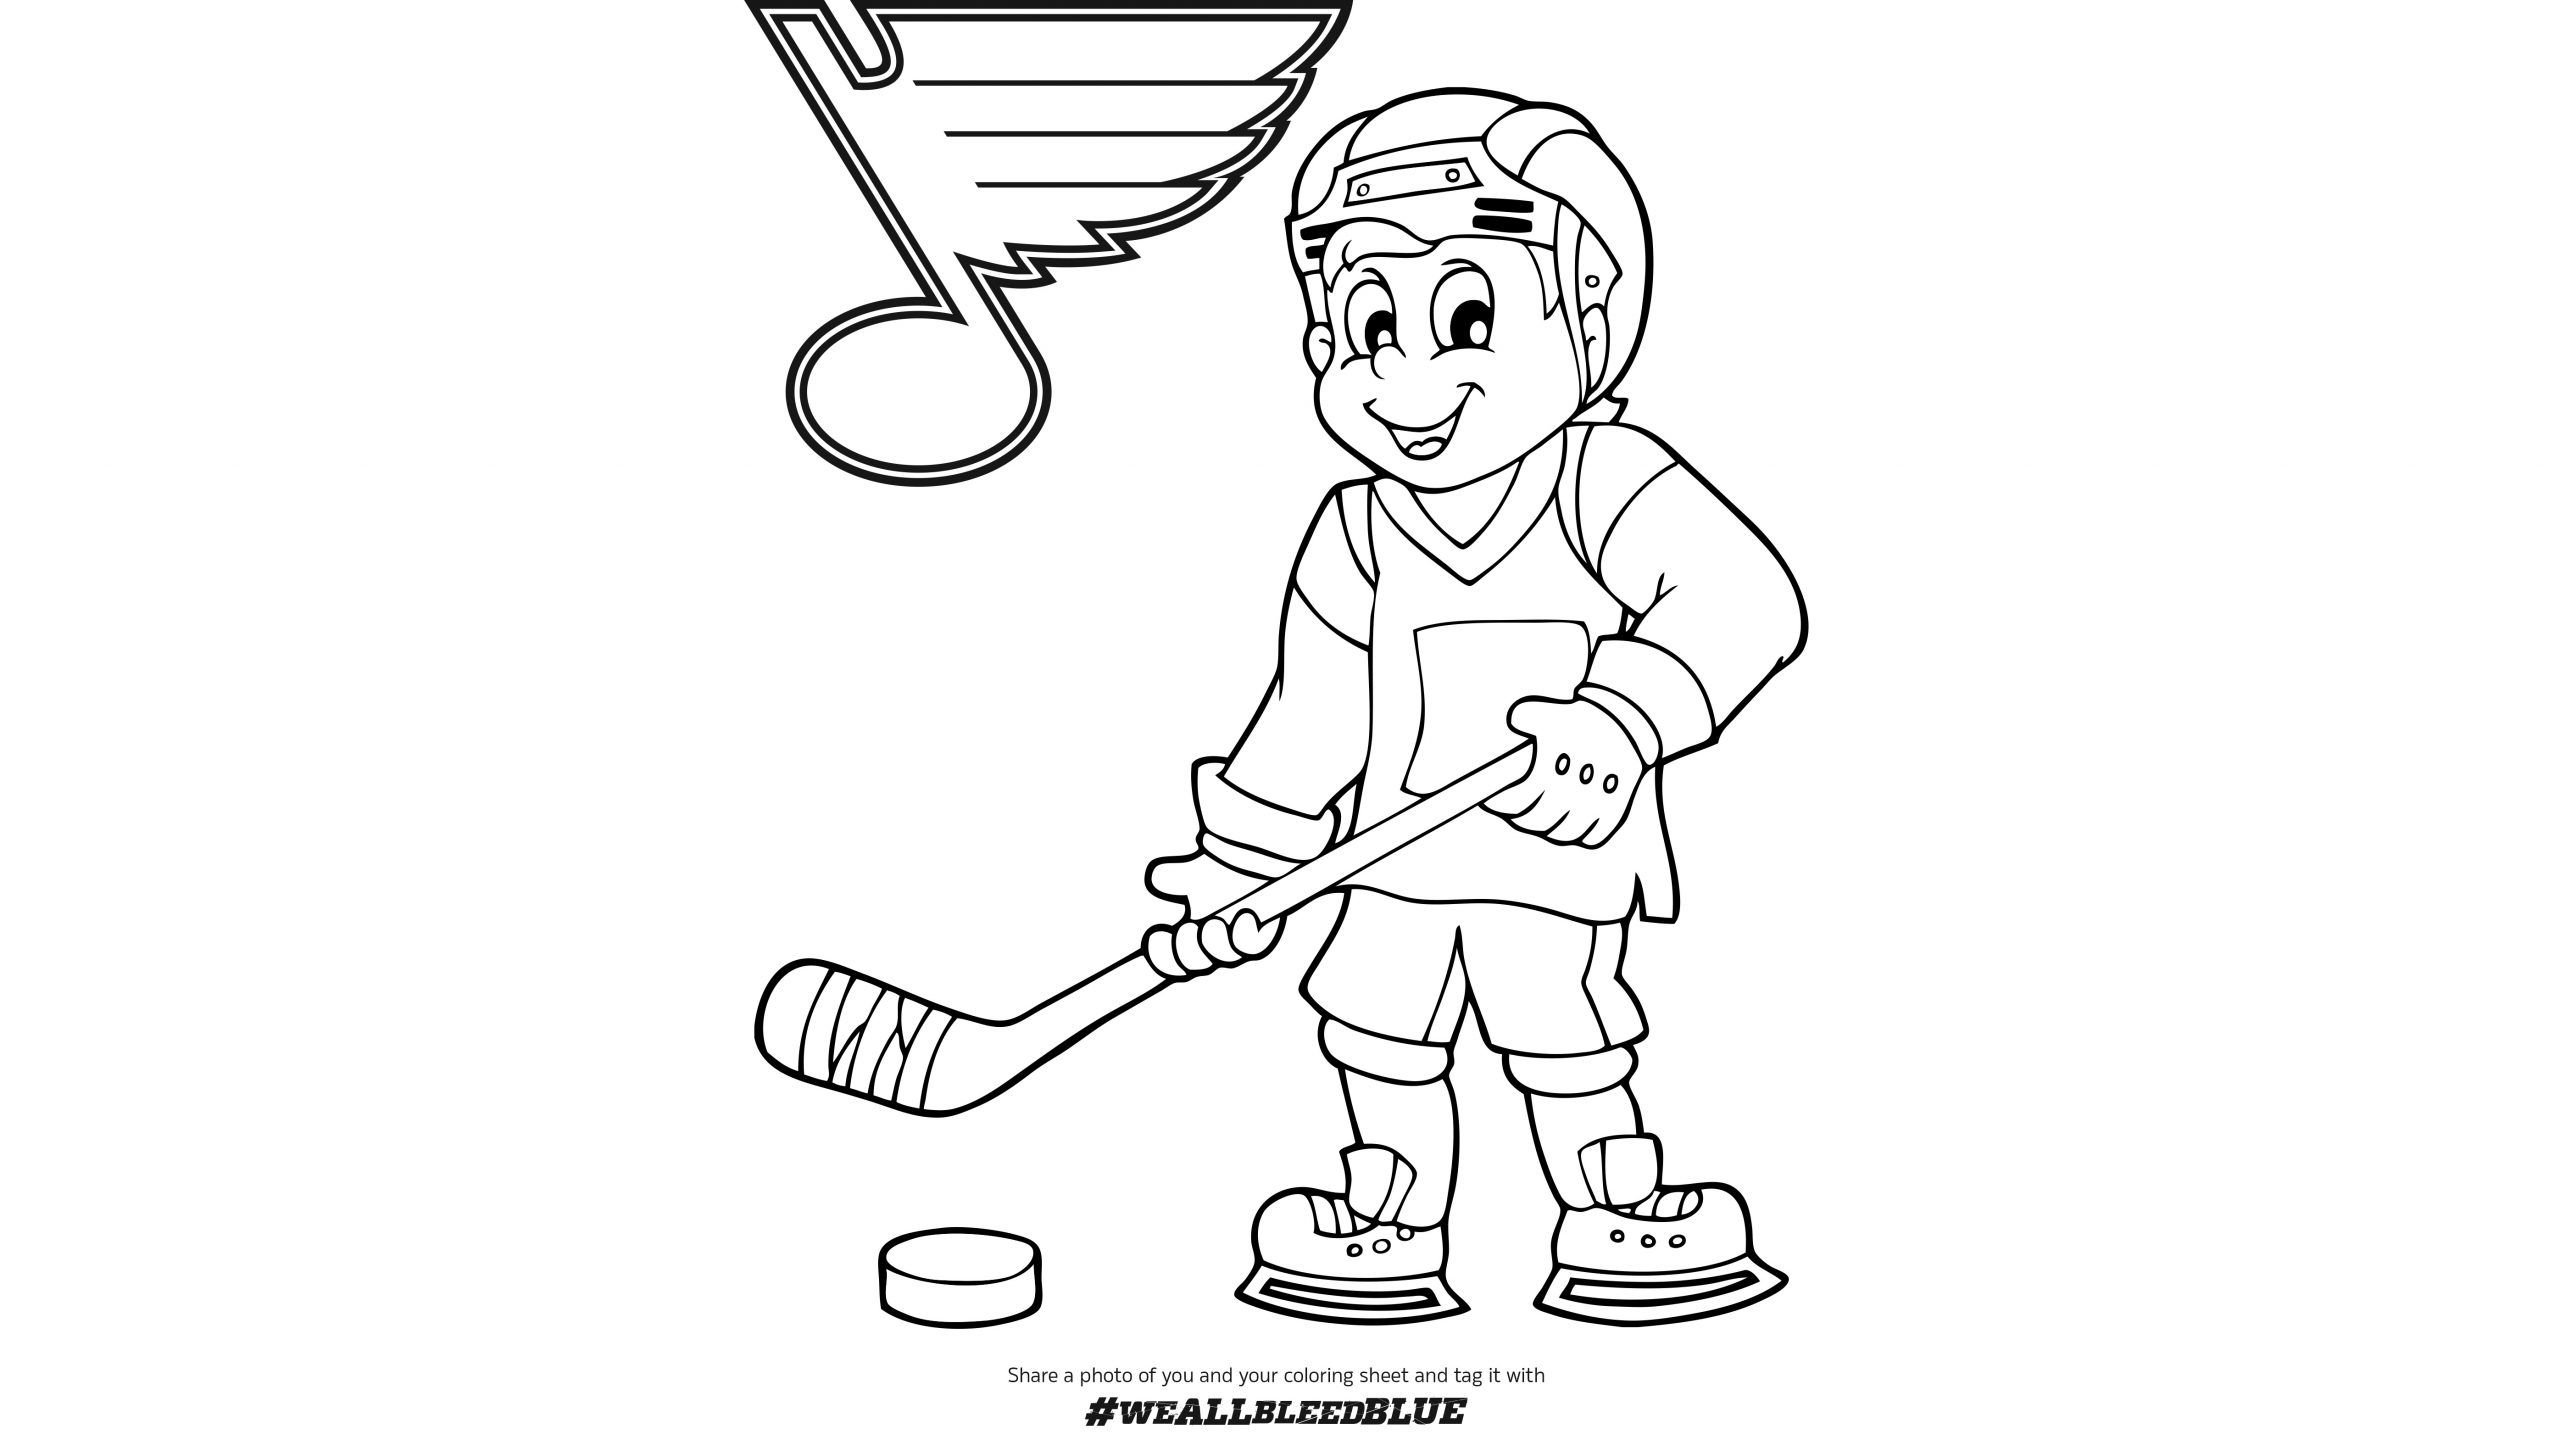 Coloring pages wallpapers